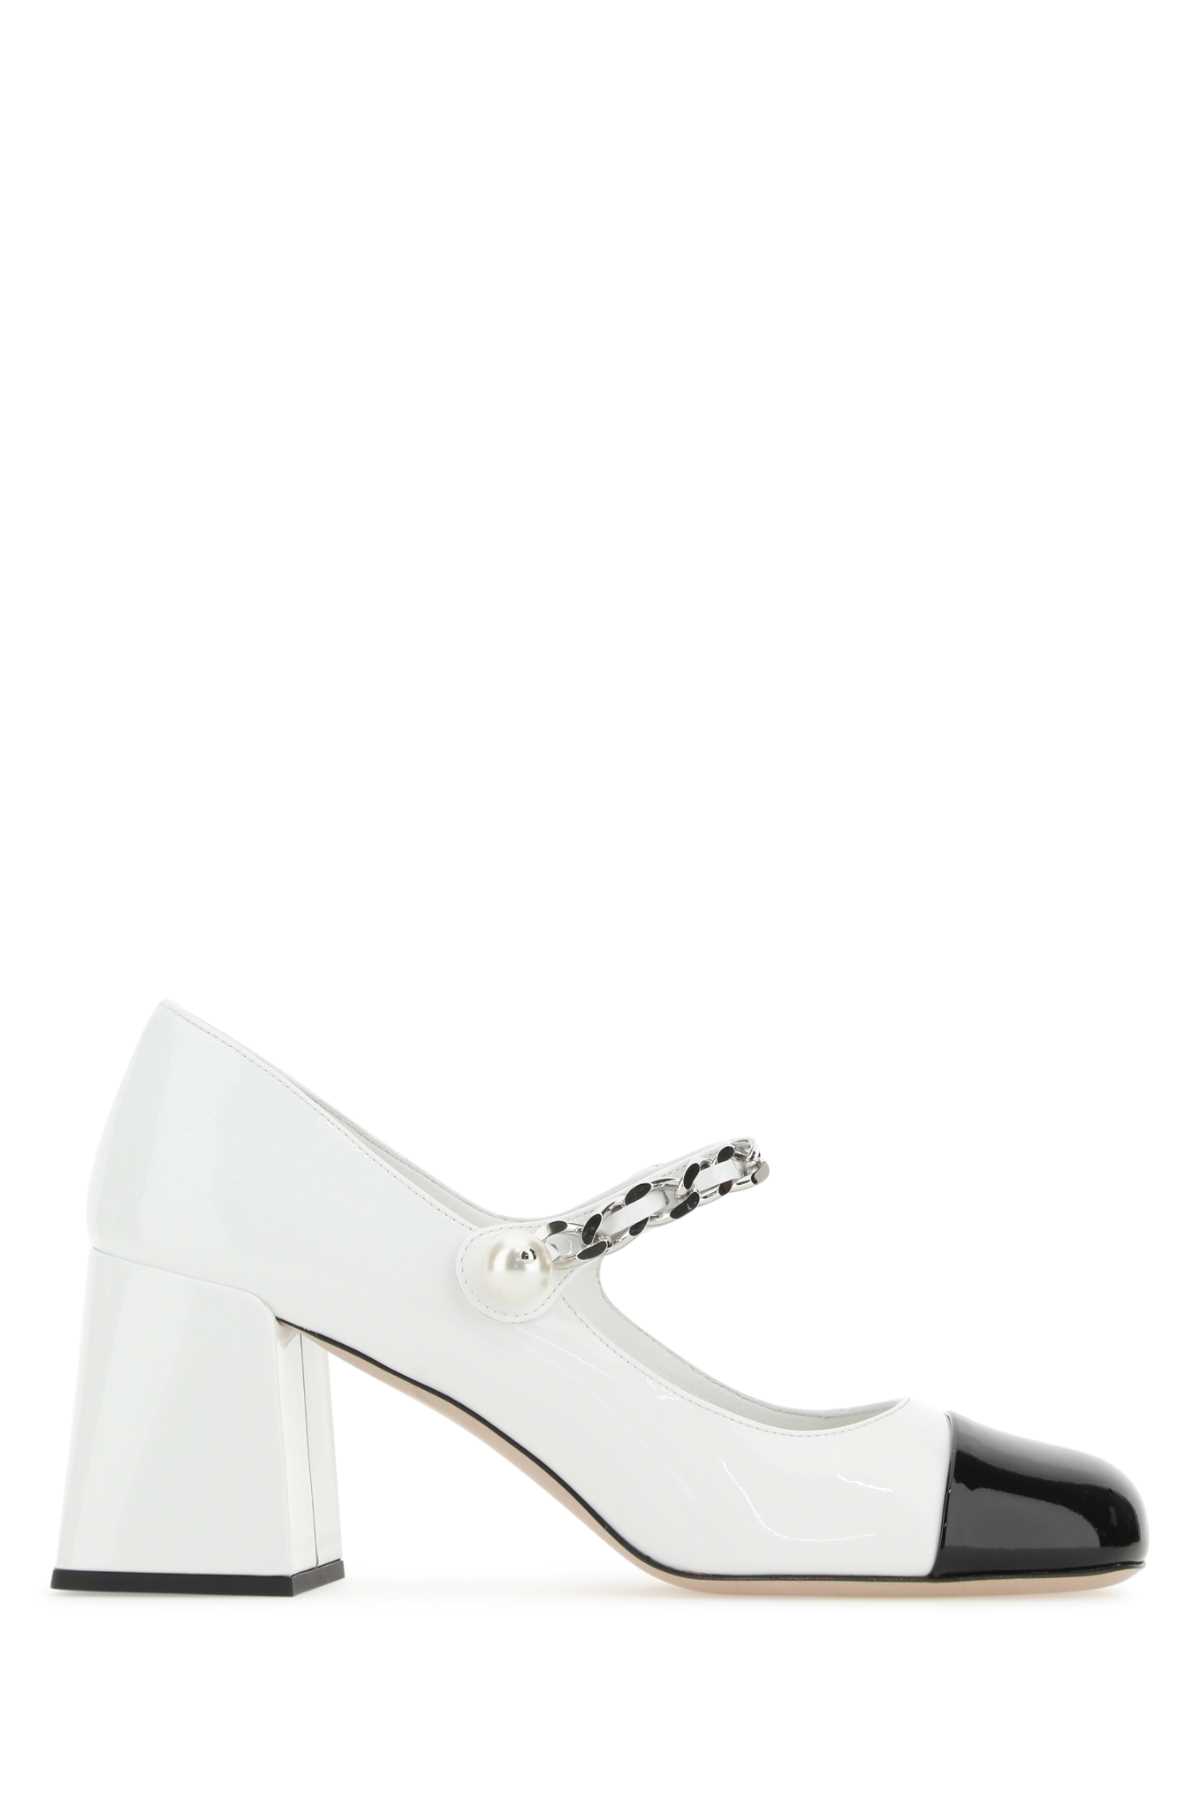 White Leather Pumps